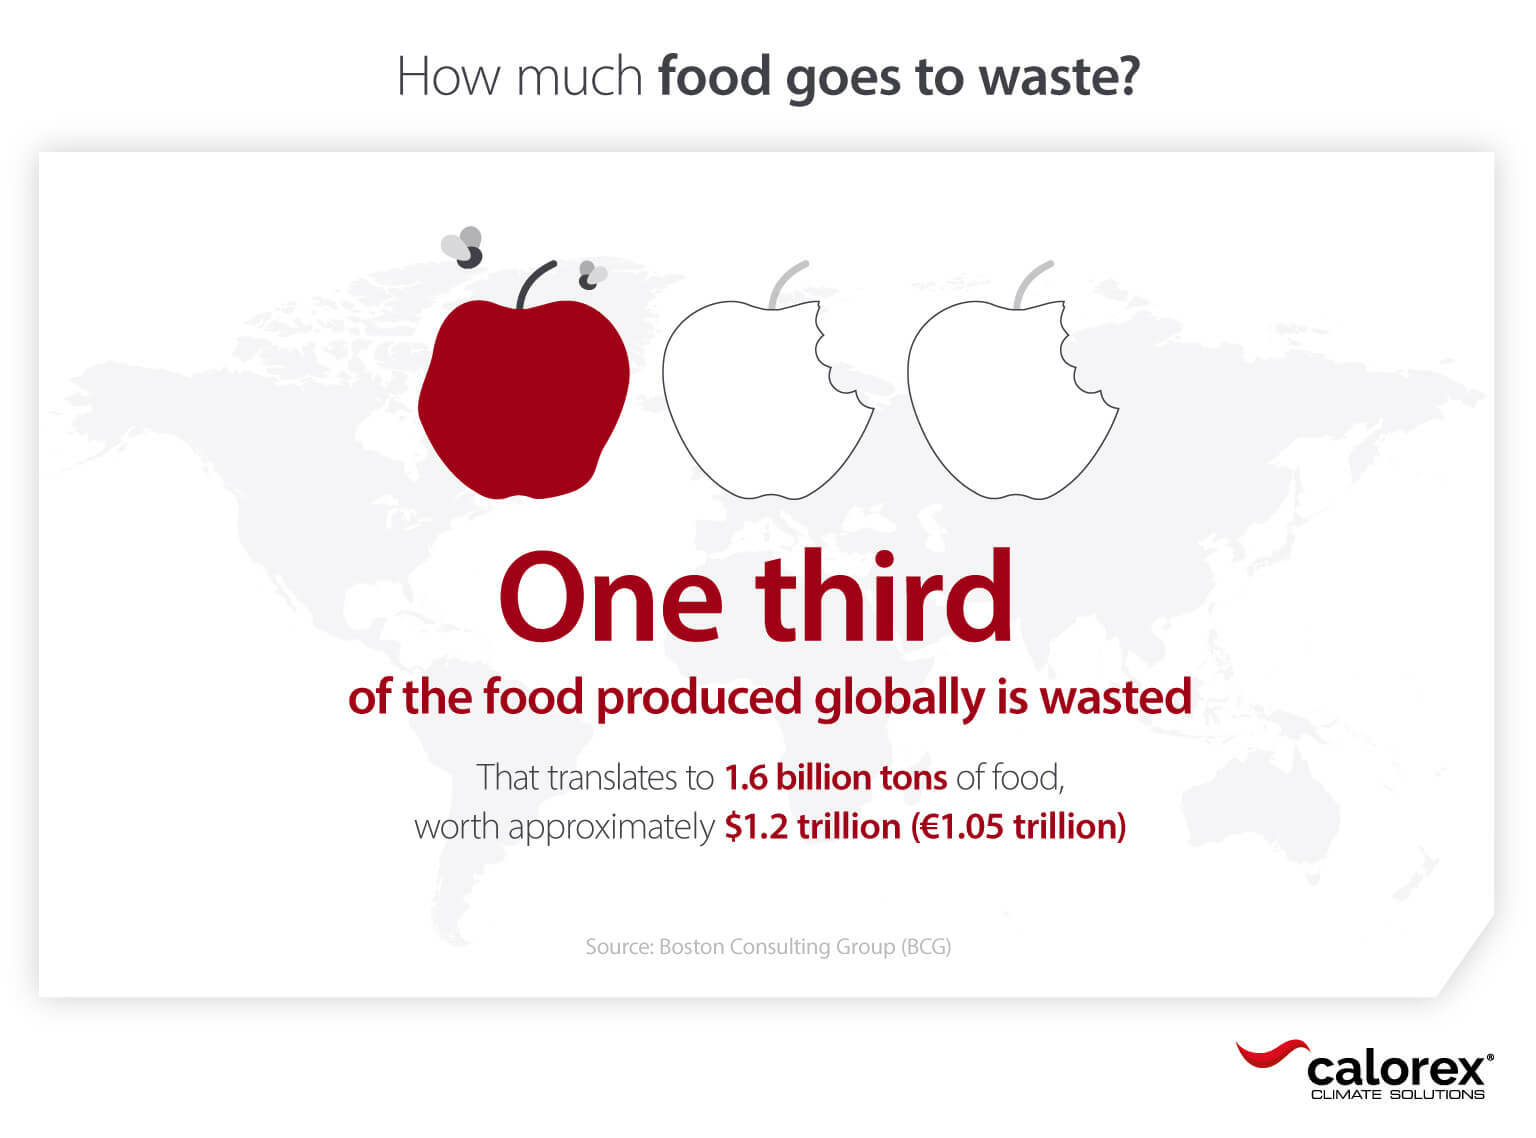 Infographic showing how one third of food produced goes to waste globally